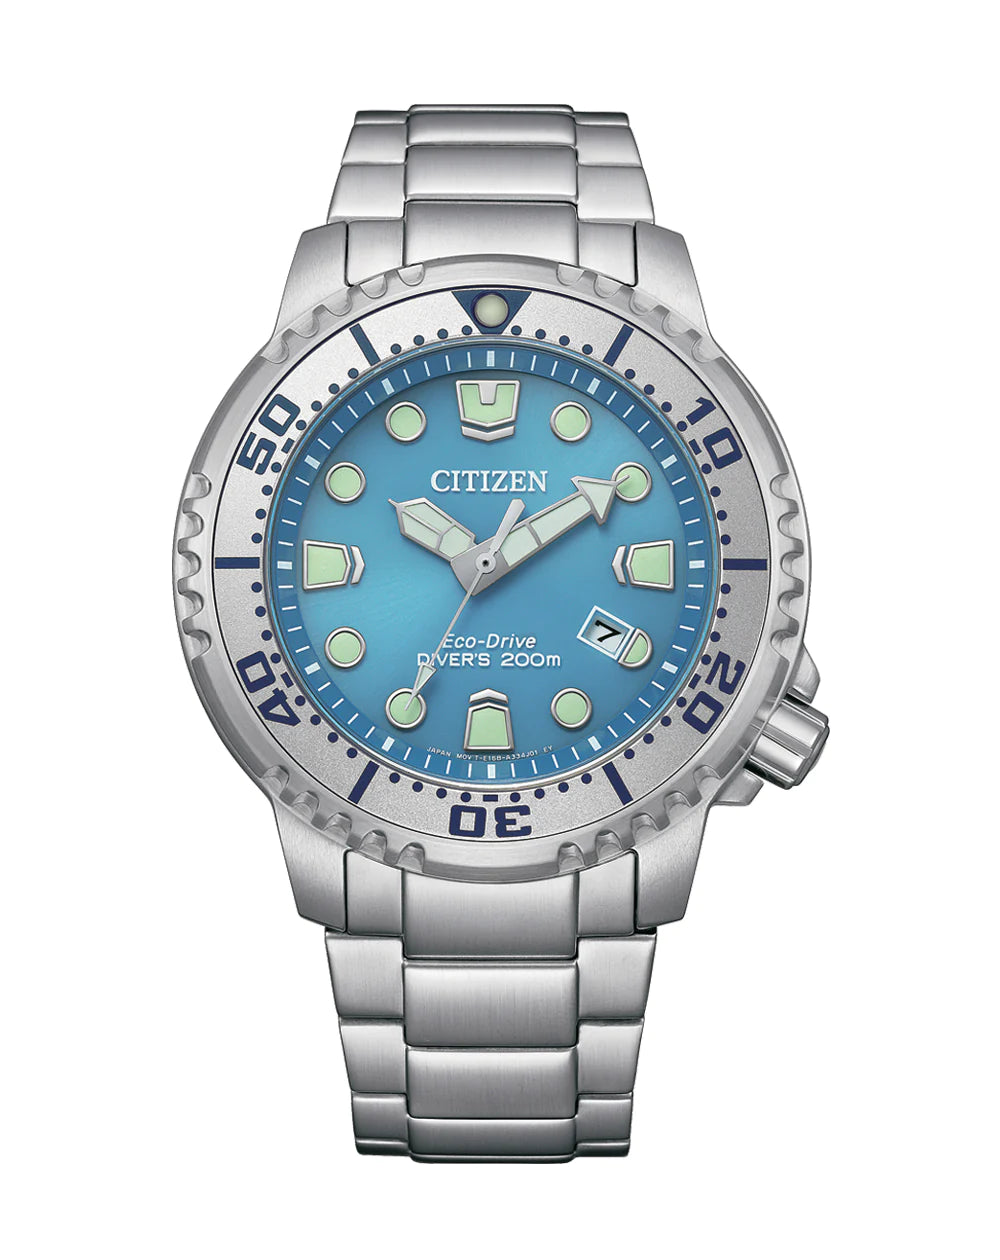 Gents STST Citizen Promaster Eco Drive Date WR 200M